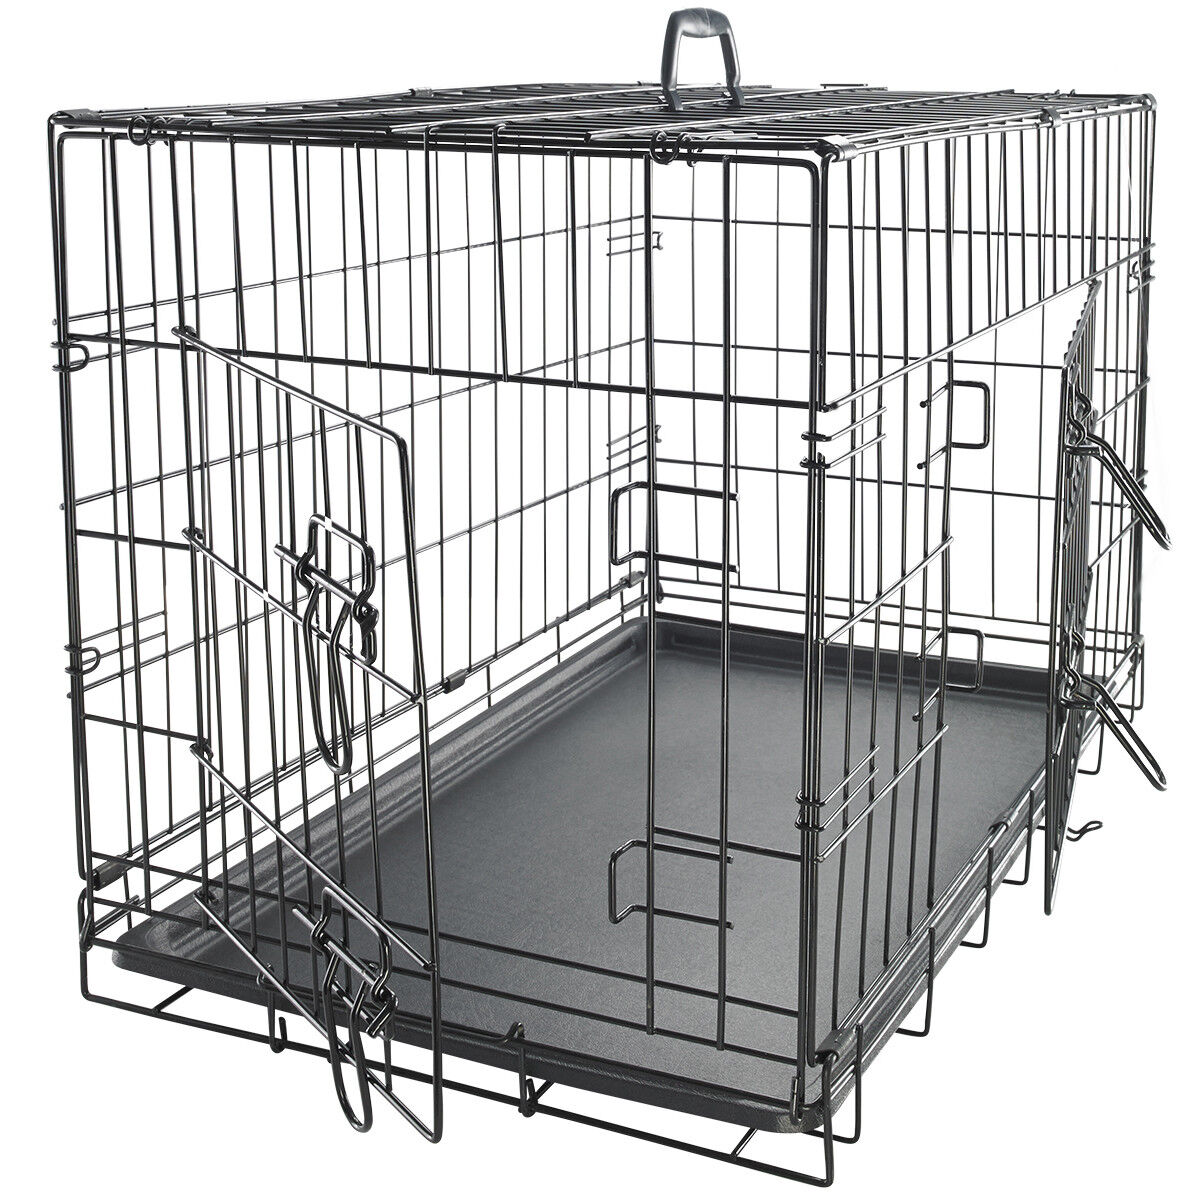 48" Dog Crate Double Door w/Divider w/Tray Folding Heavy Duty Metal Pet Cage XXL Paws & Pals PTCG01-48